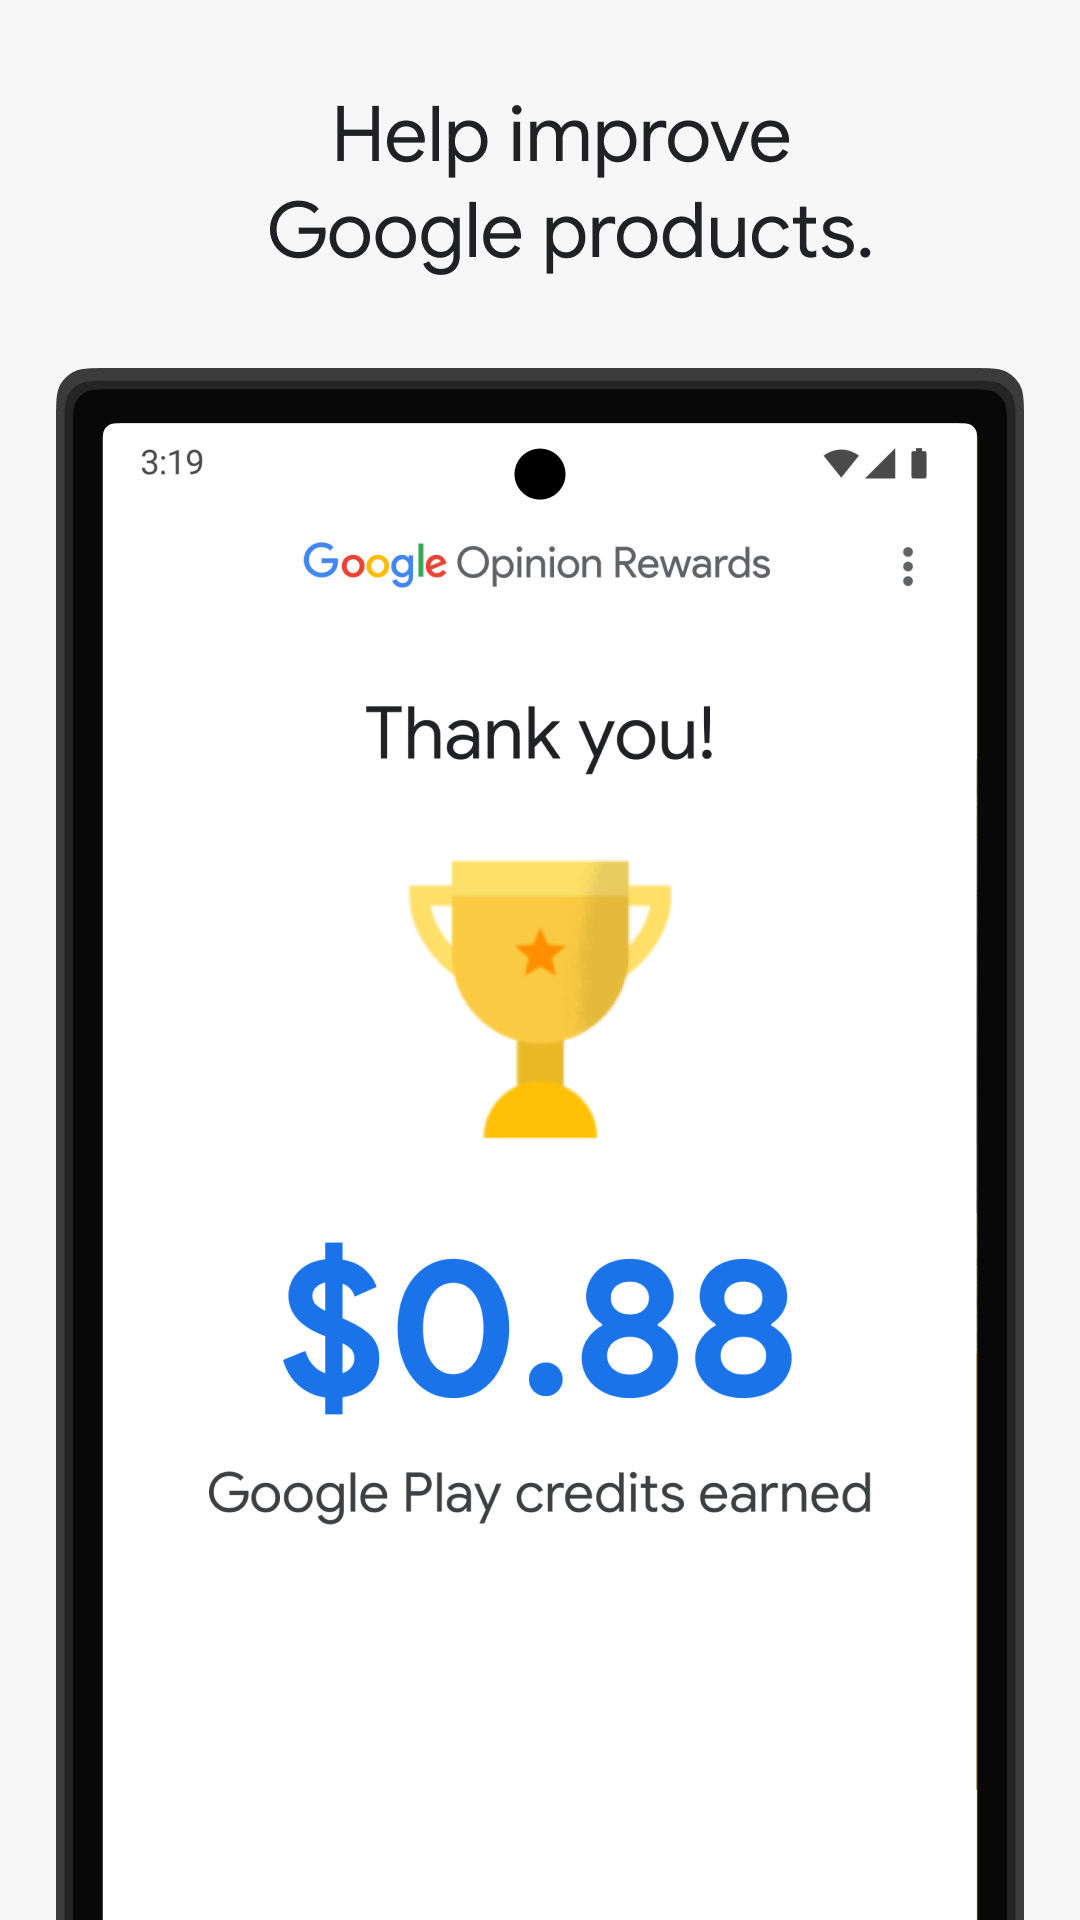 This is the image of the Google Rewards program where the user is rewarded with money that can be redeemed in the Google Play Store.